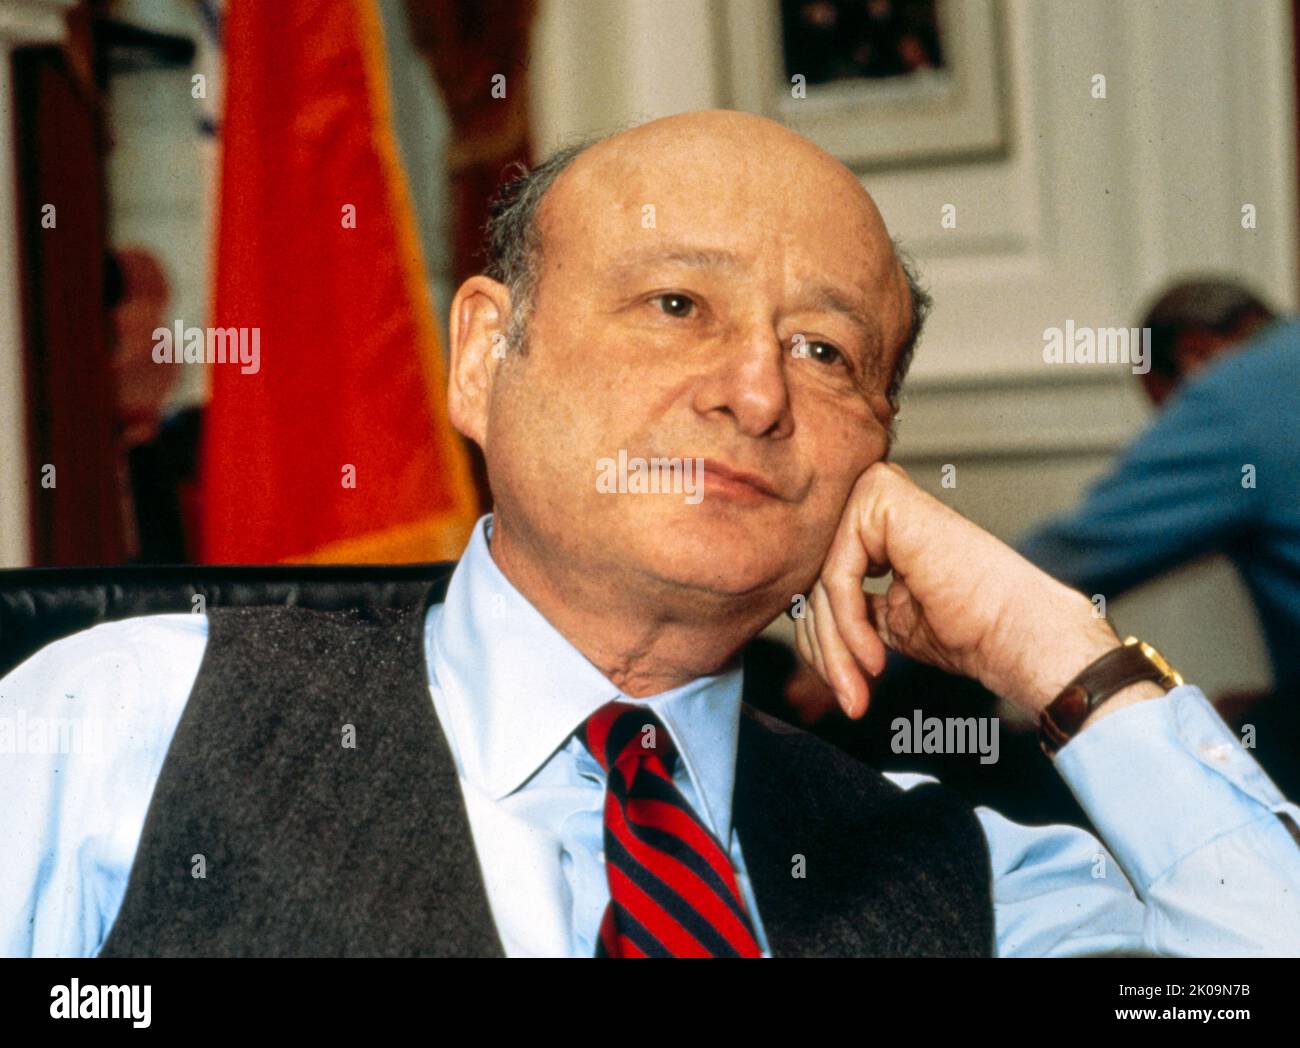 Edward Irving Koch (1924 - 2013) was an American politician, lawyer, political commentator, film critic, and television personality. He served in the United States House of Representatives from 1969 to 1977 and was mayor of New York City from 1978 to 1989. Stock Photo